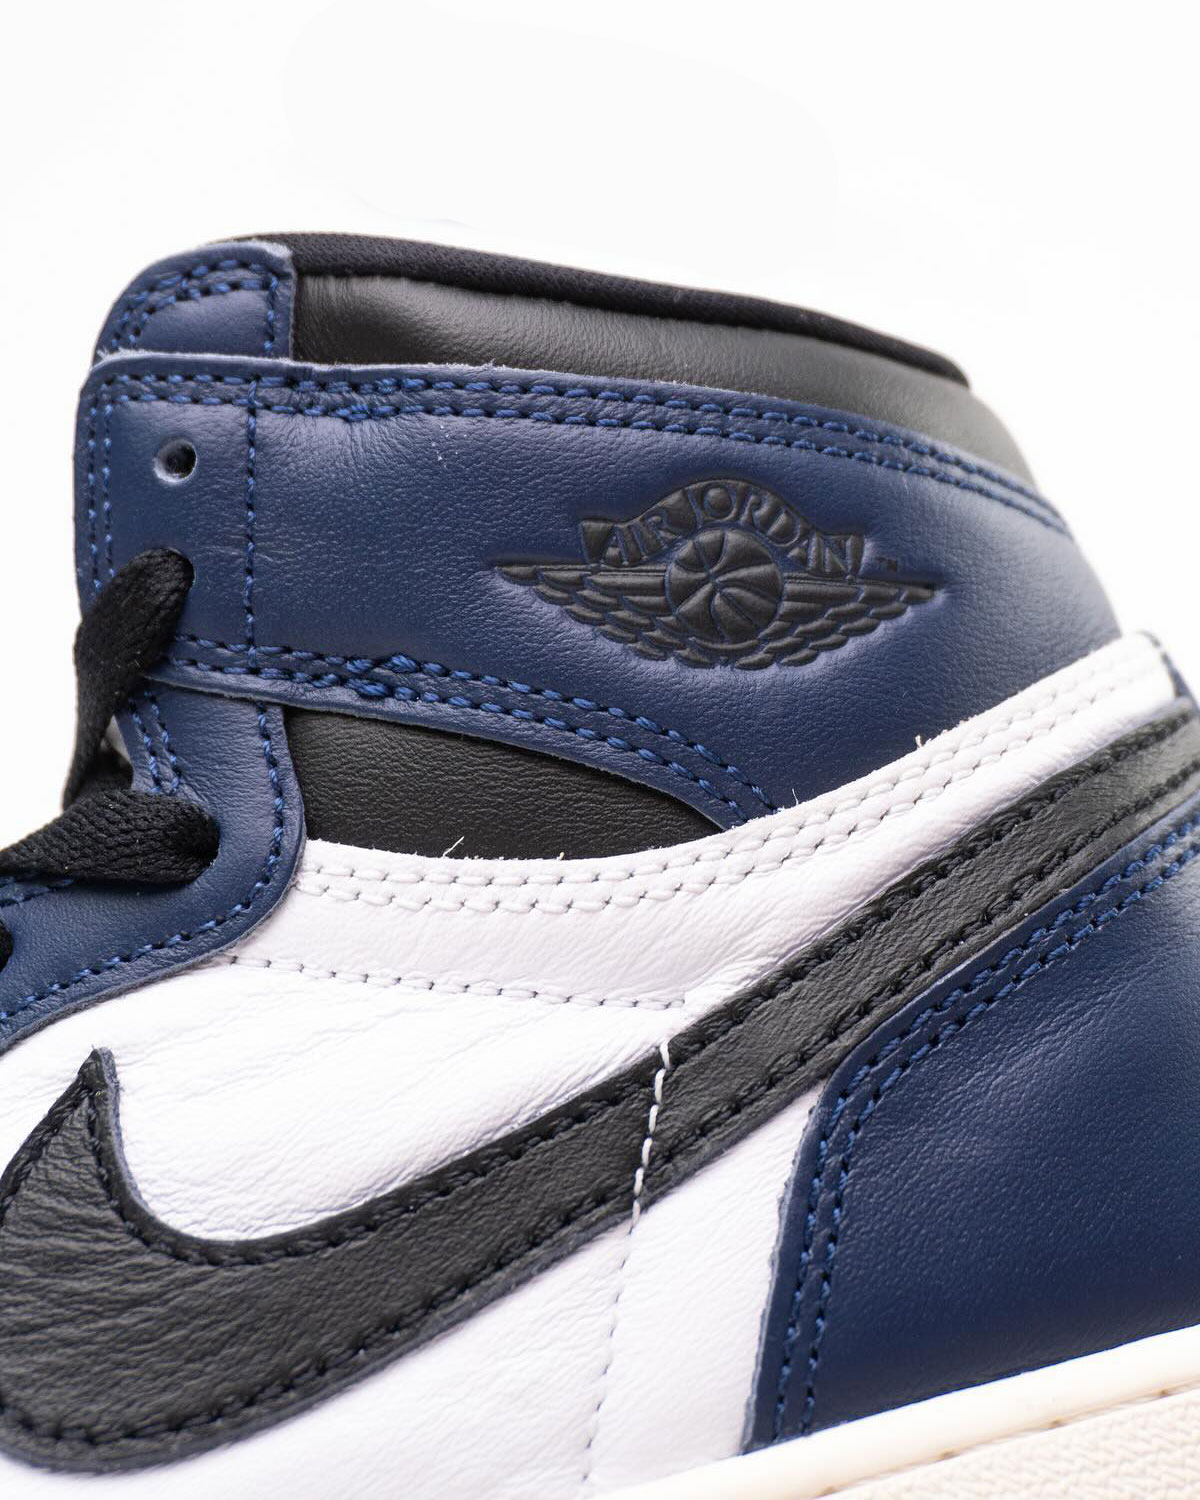 Do you really know the history of the Air Jordan Selection 1 Retro High Og Midnight Navy Dz5485 401 1